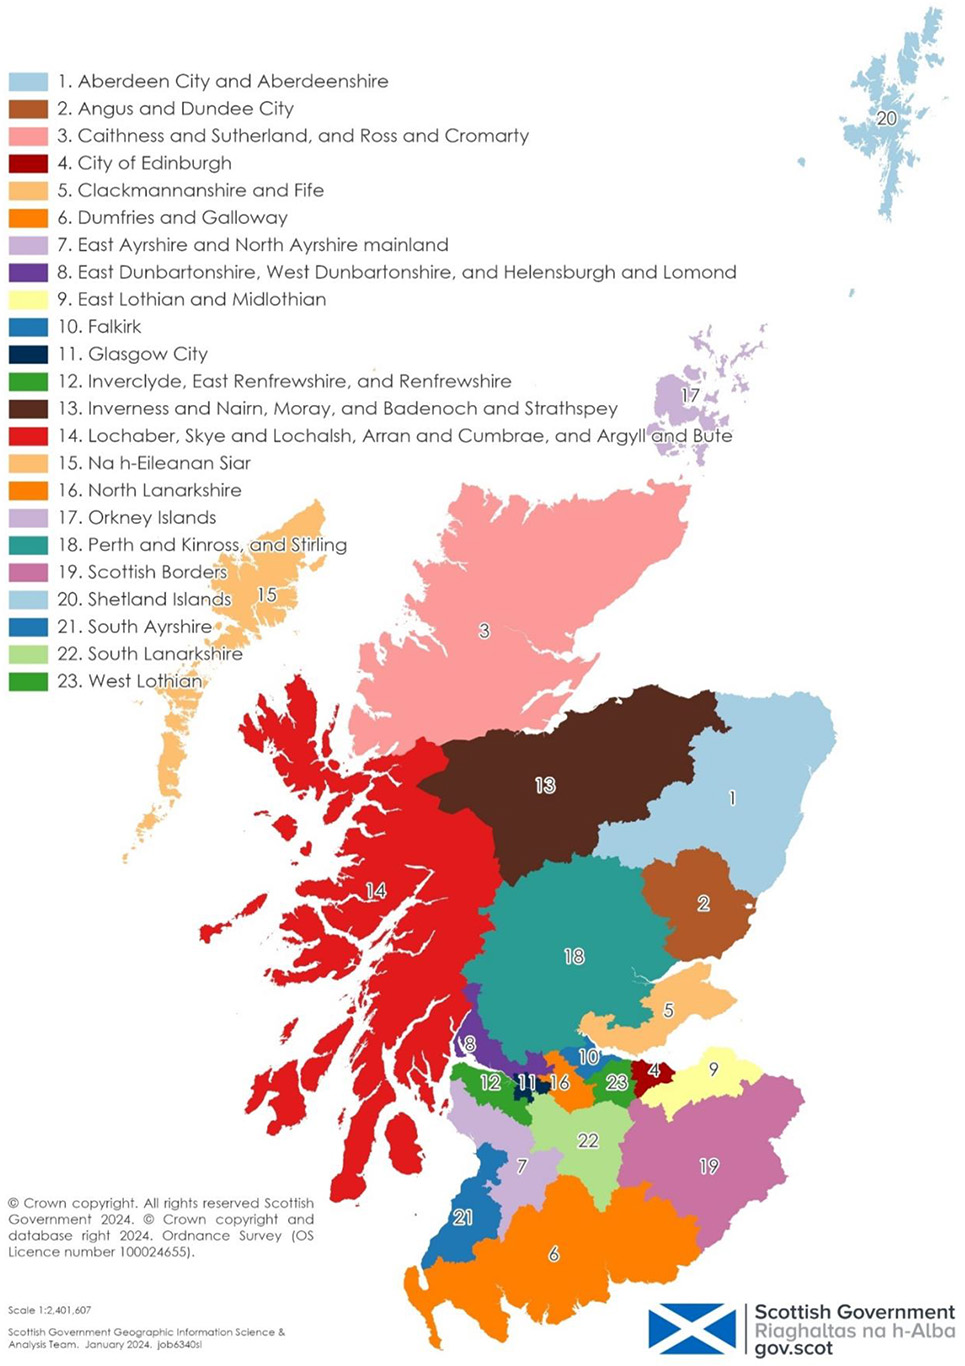 A map of Scotland showing the 23 existing ITL3 regions within Scotland.